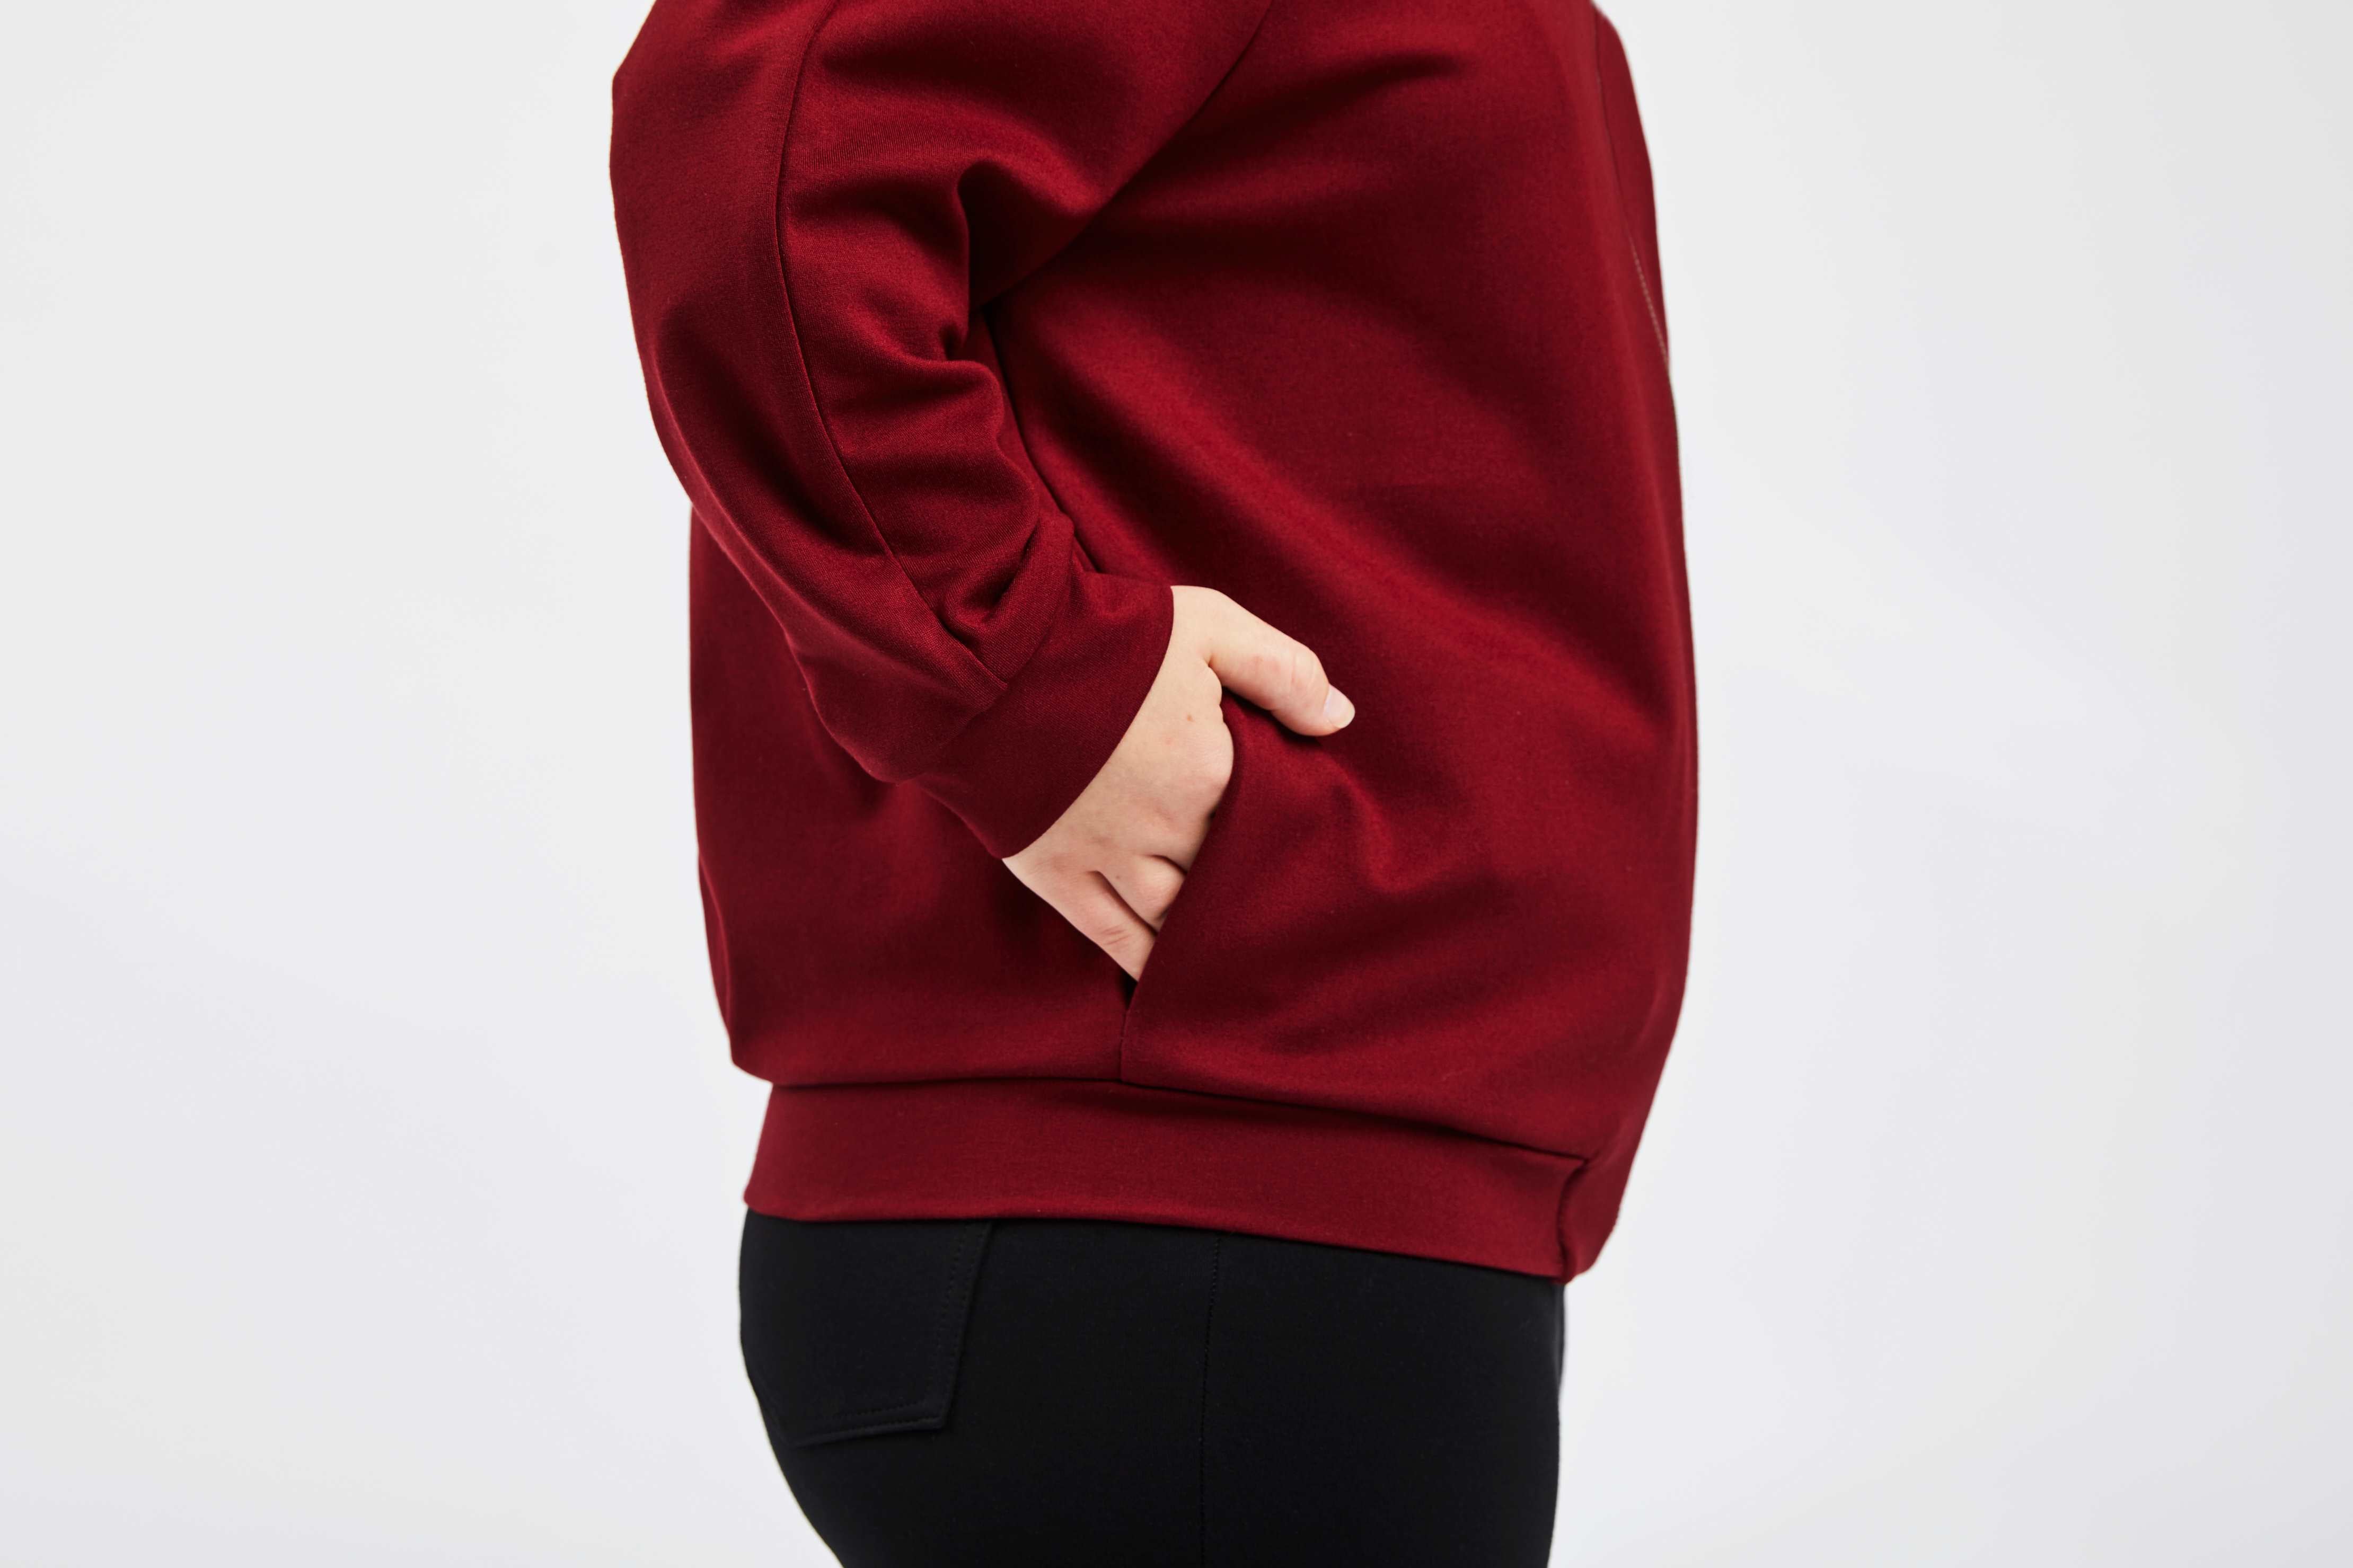 detailed view of hands in pocket of red college jacket